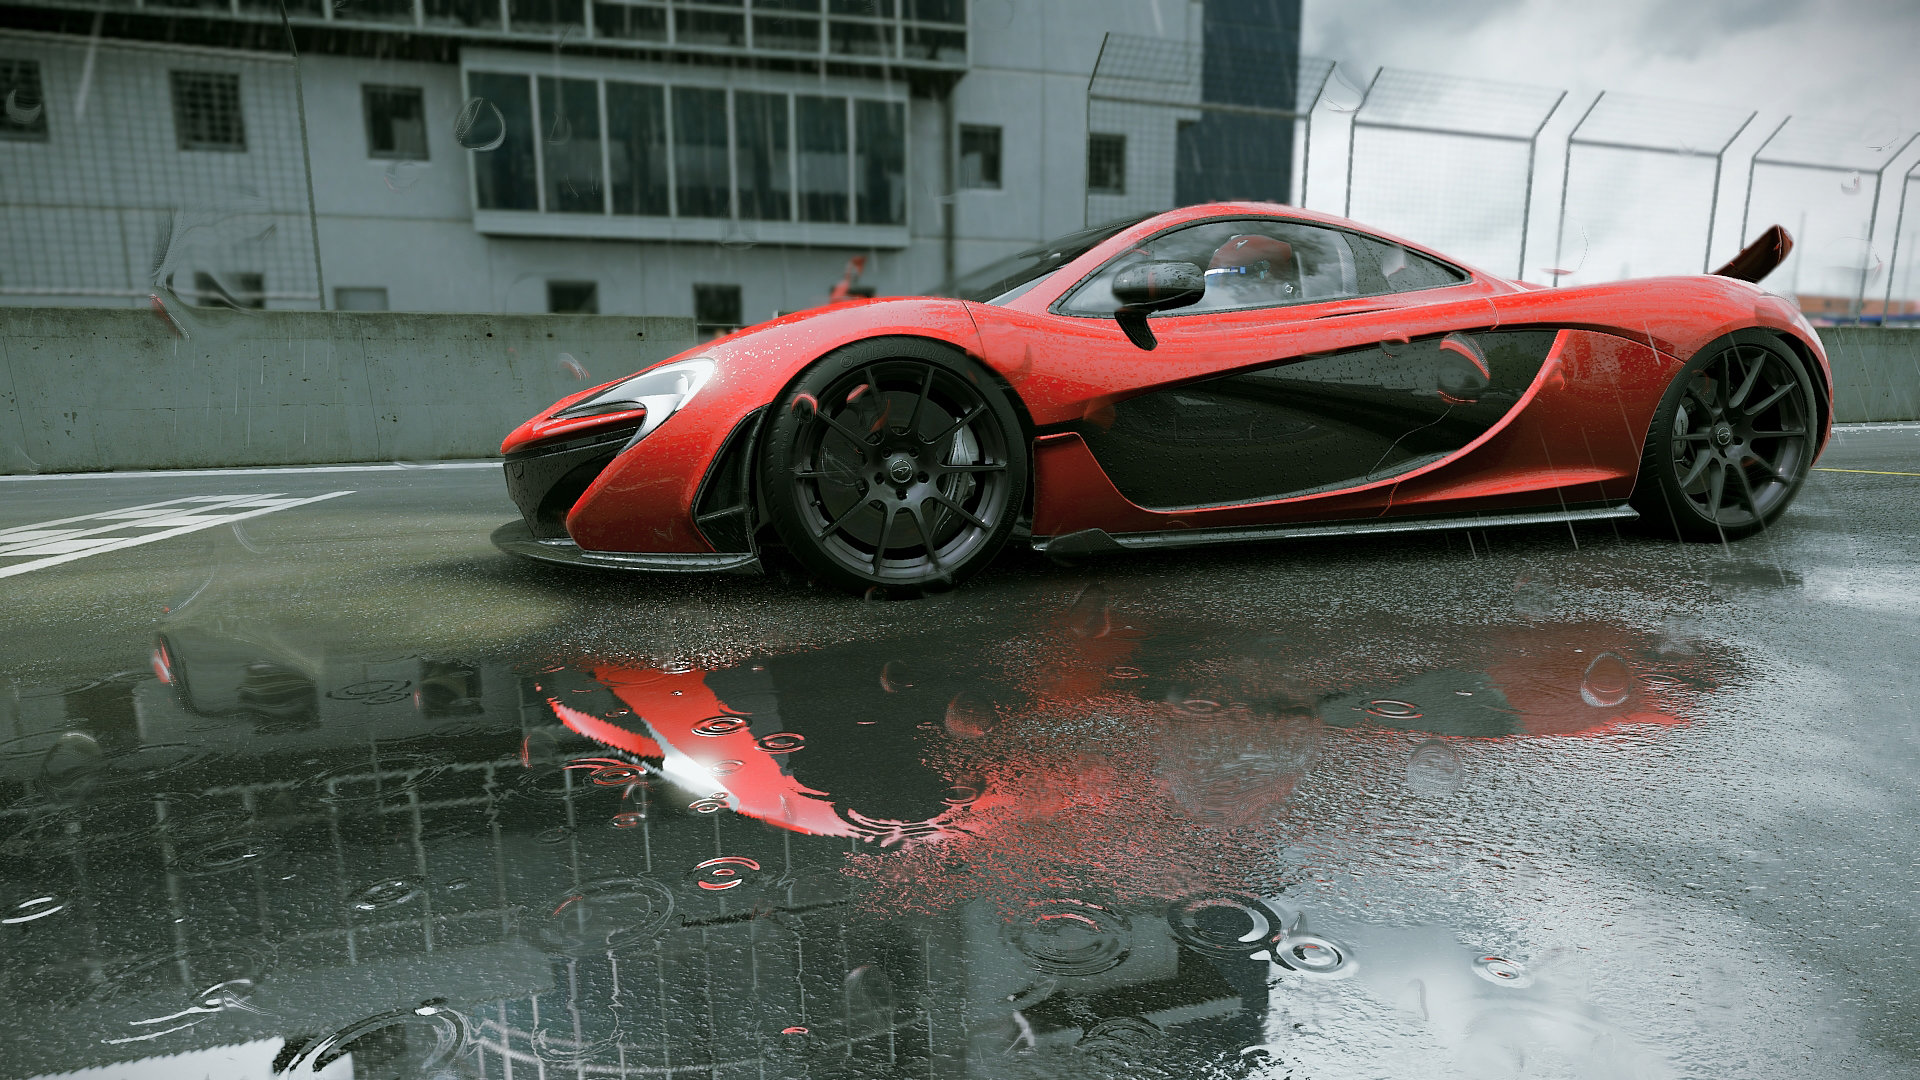 Awesome Project Cars free background ID:65855 for hd 1920x1080 desktop